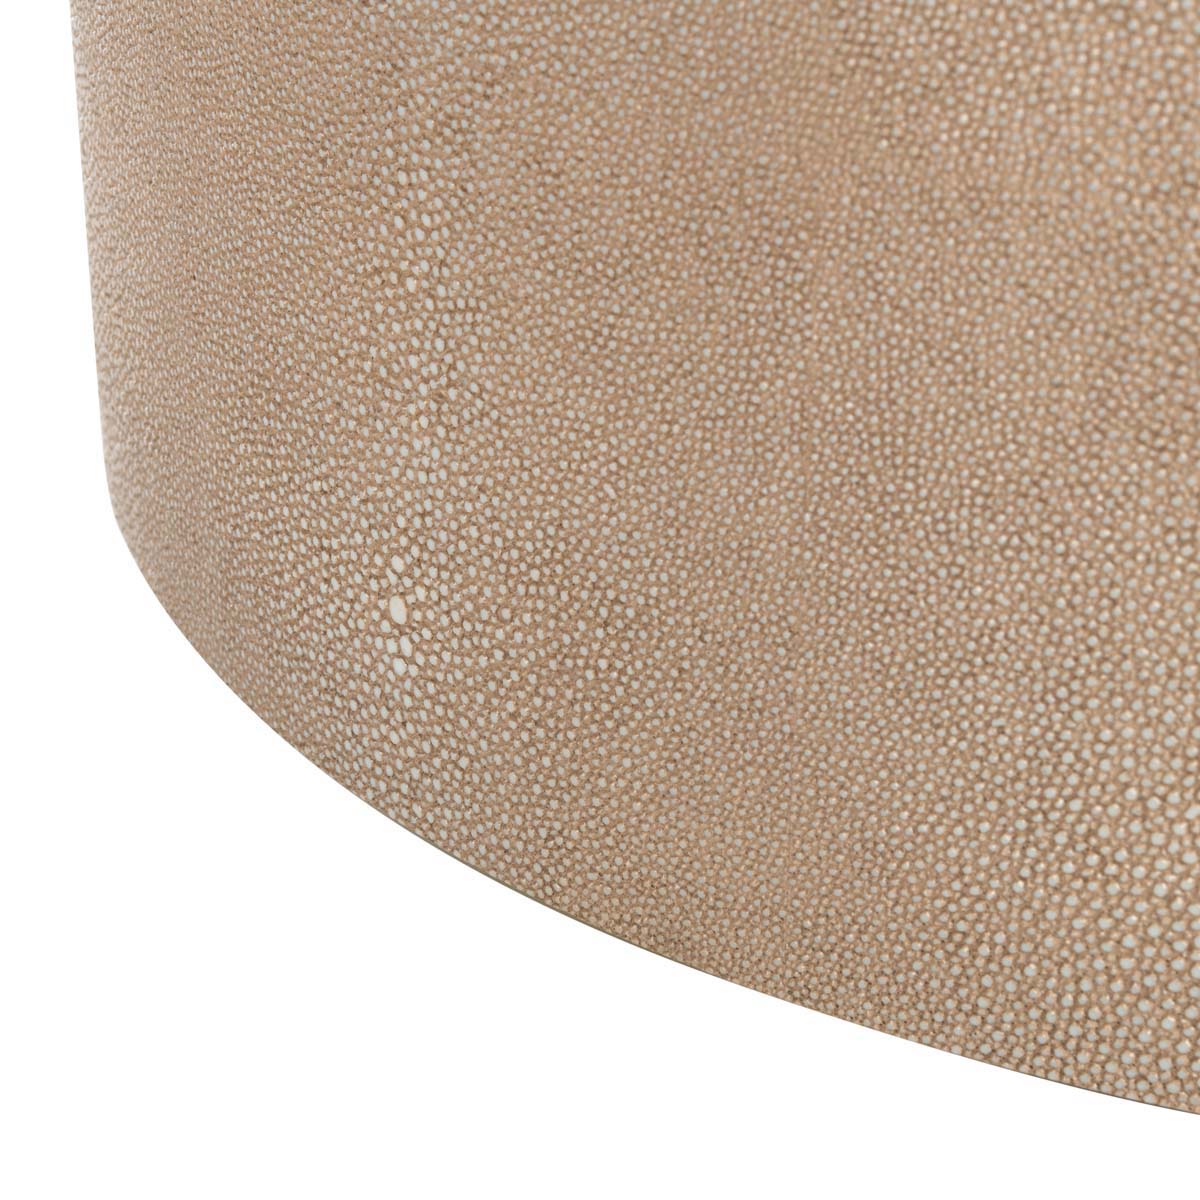 Safavieh Couture Diesel Faux Shagreen End Table - Natural